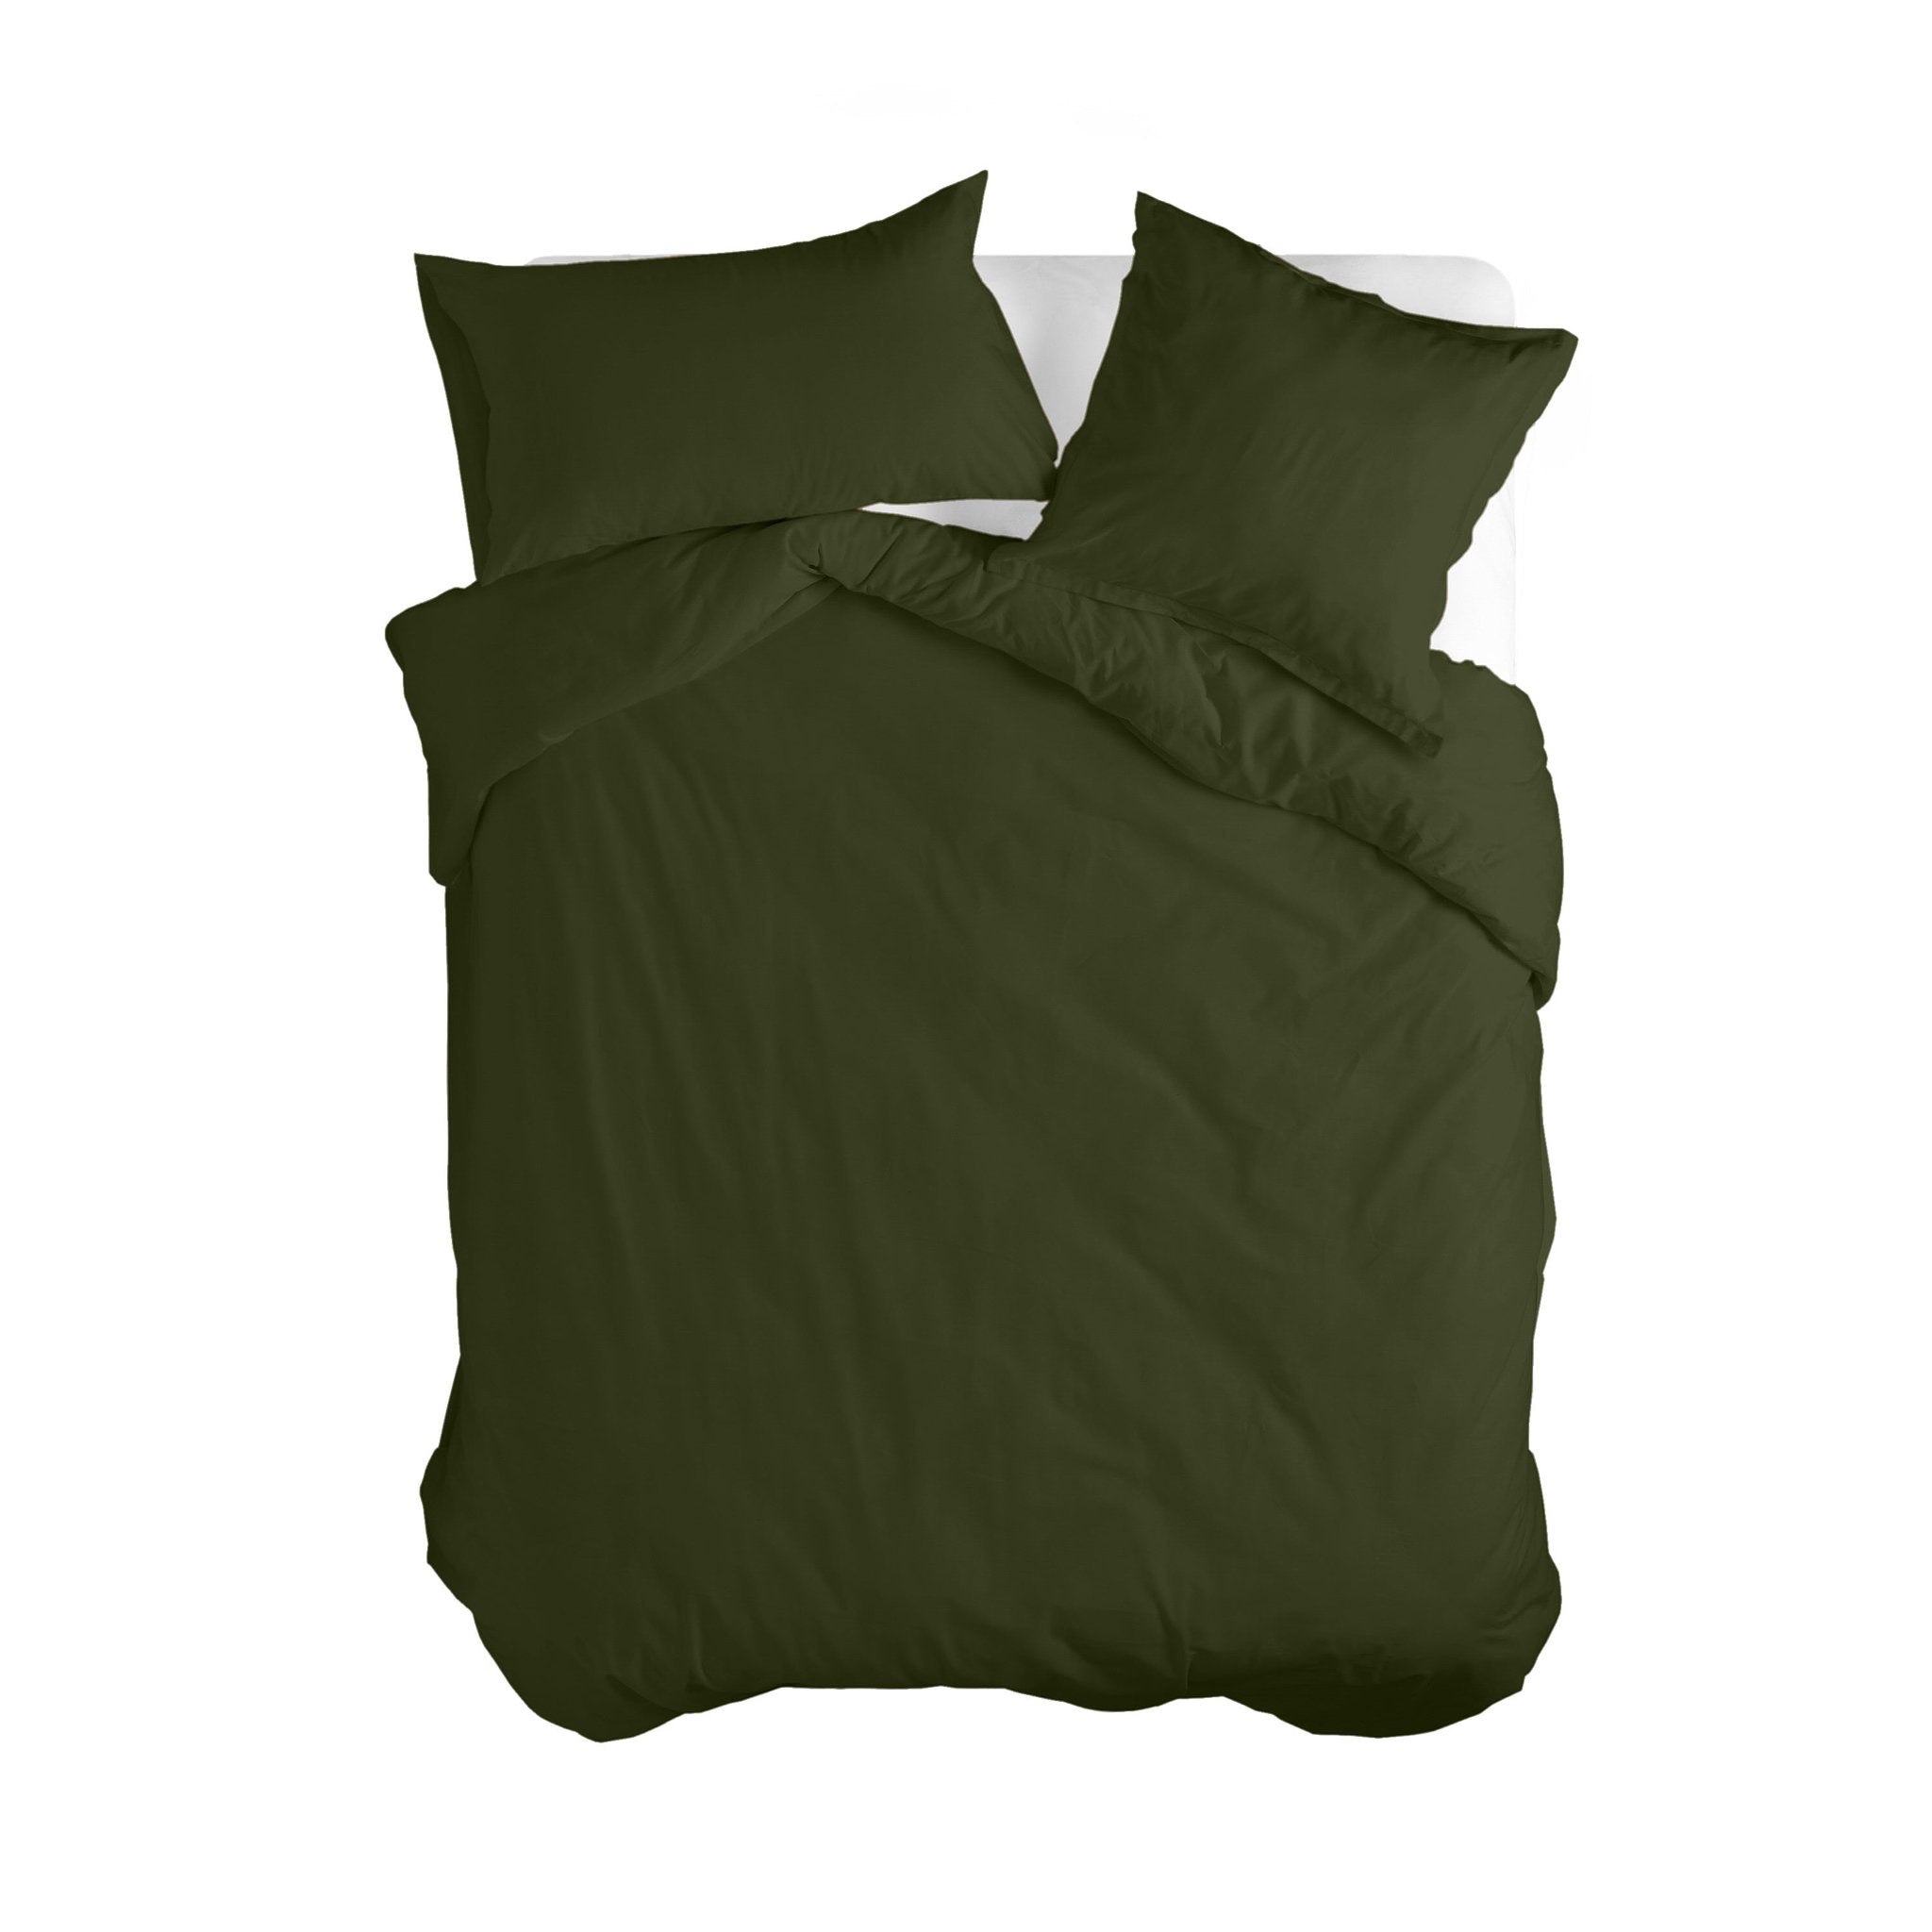 Happy Friday Duvet cover Basic 220x220 cm (Double) Olive green